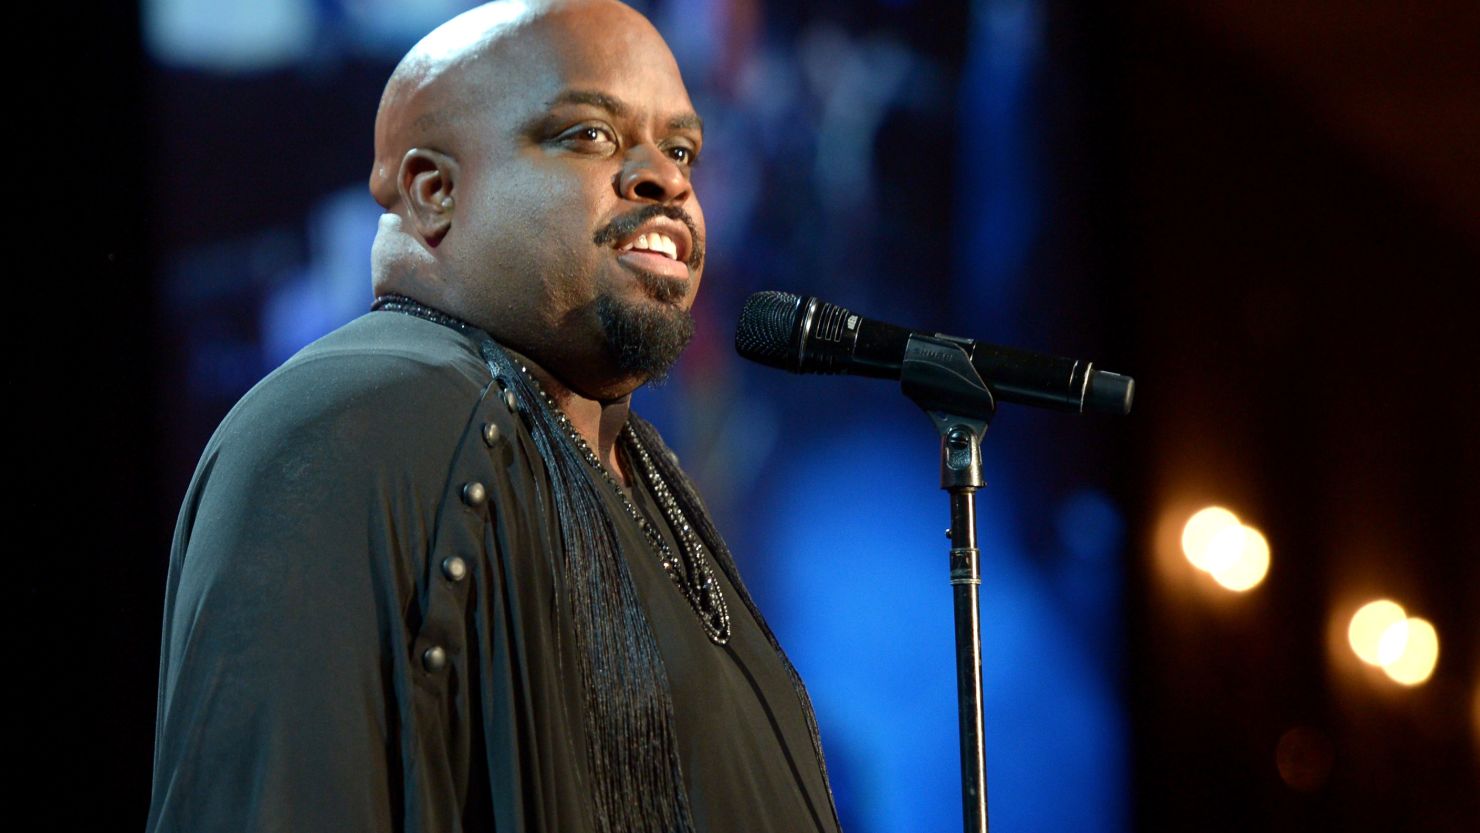 Musician CeeLo Green calls controversial remarks he made about rape on Twitter "idiotic."